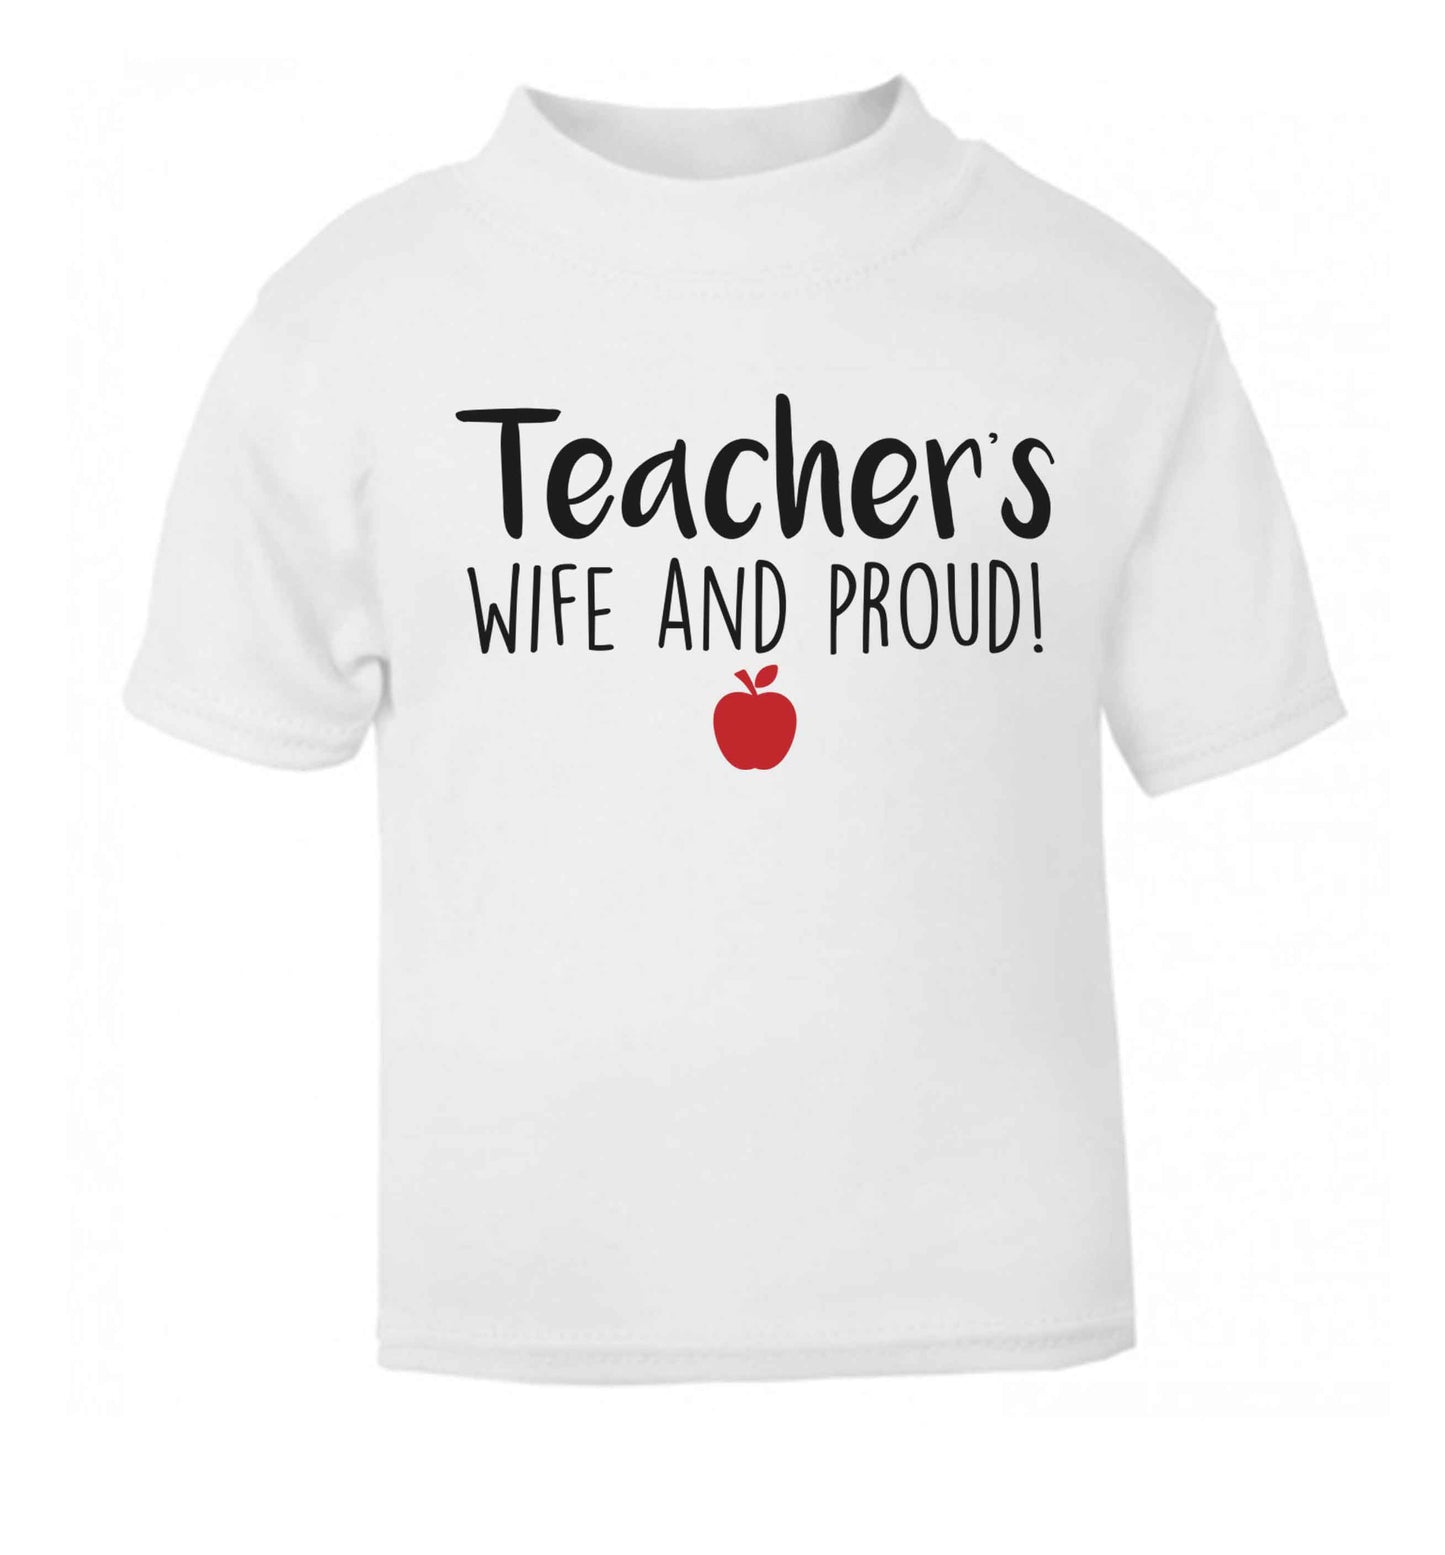 Teachers wife and proud white baby toddler Tshirt 2 Years